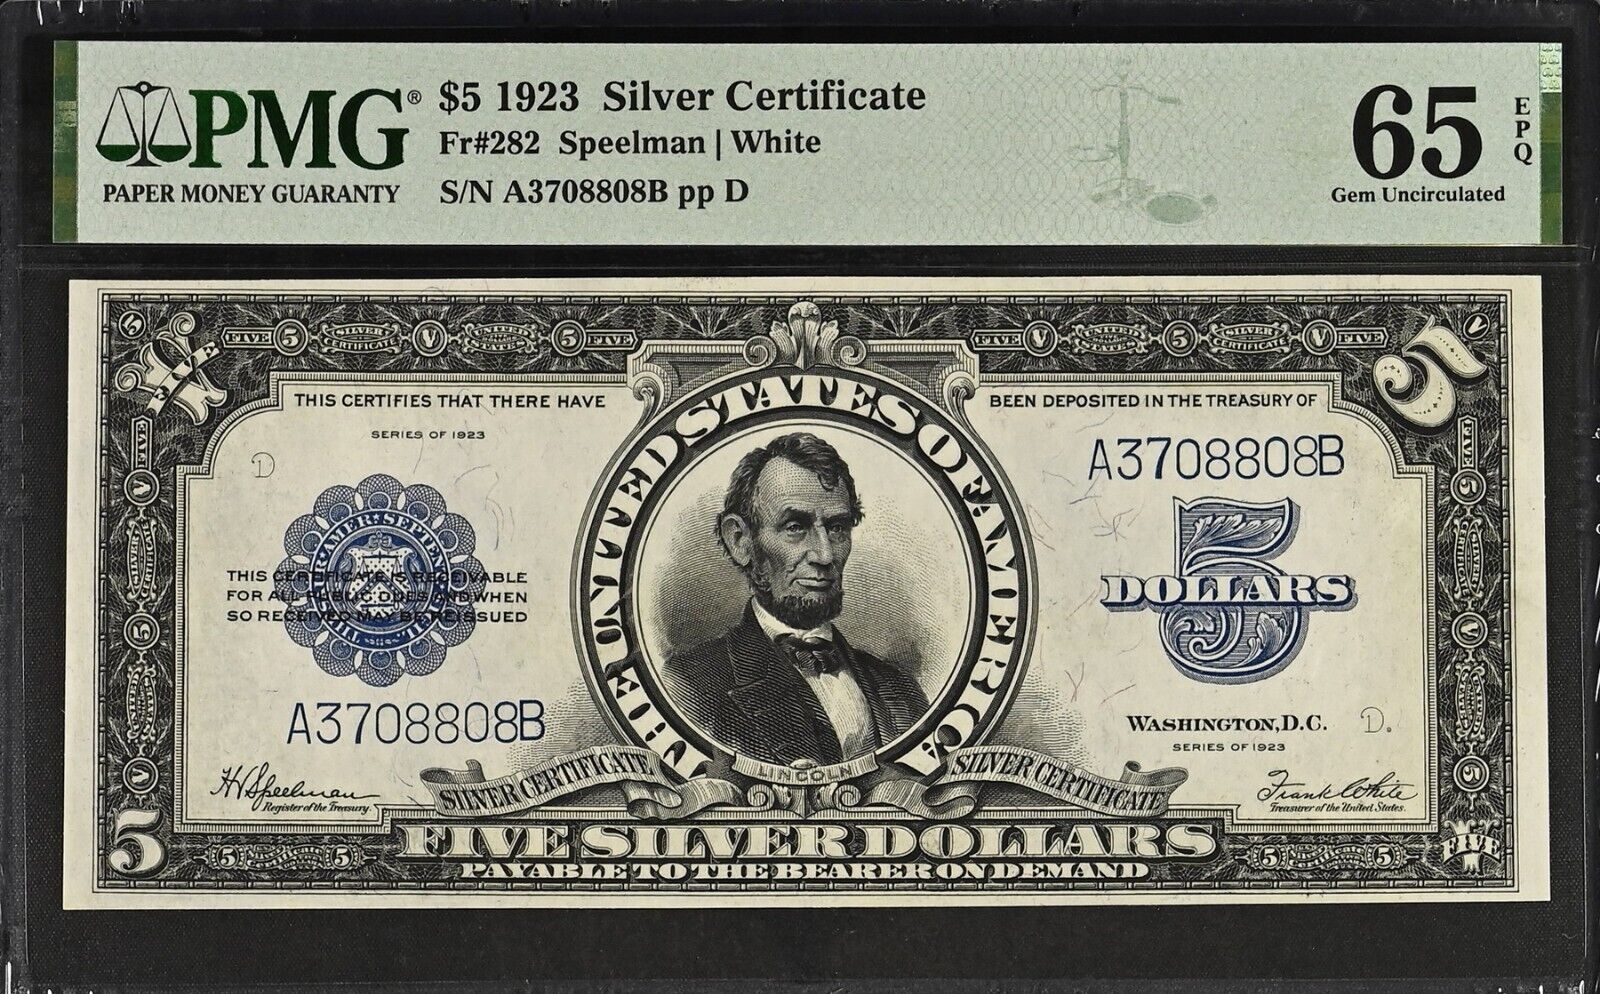 1923 $5 Silver Certificate, Lincoln Porthole Note. Gem Uncirculated PMG 65 EPQ